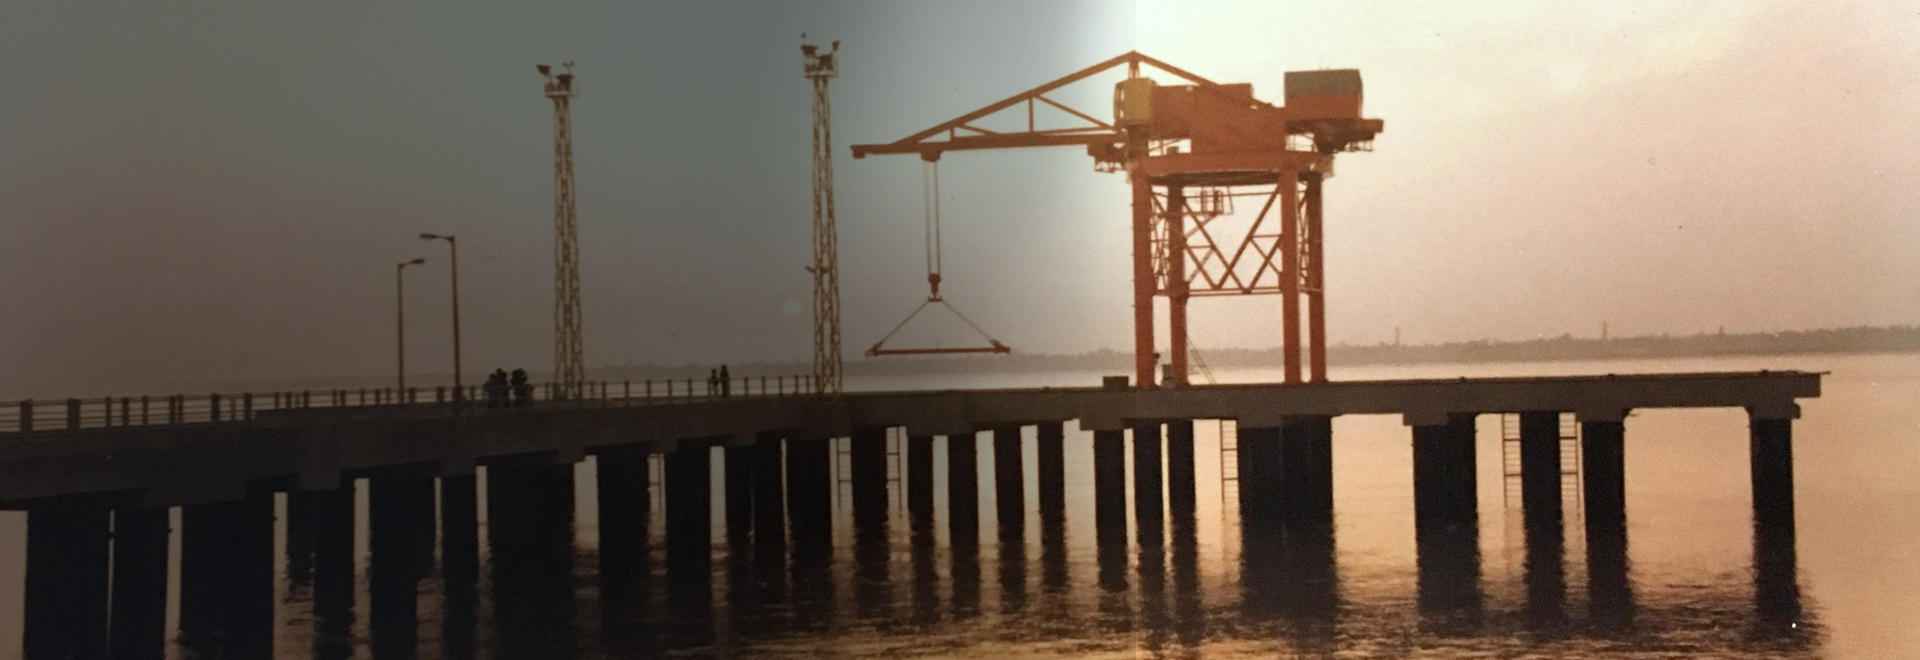 Berthing Jetty With Container Handling Crane on River Ganges